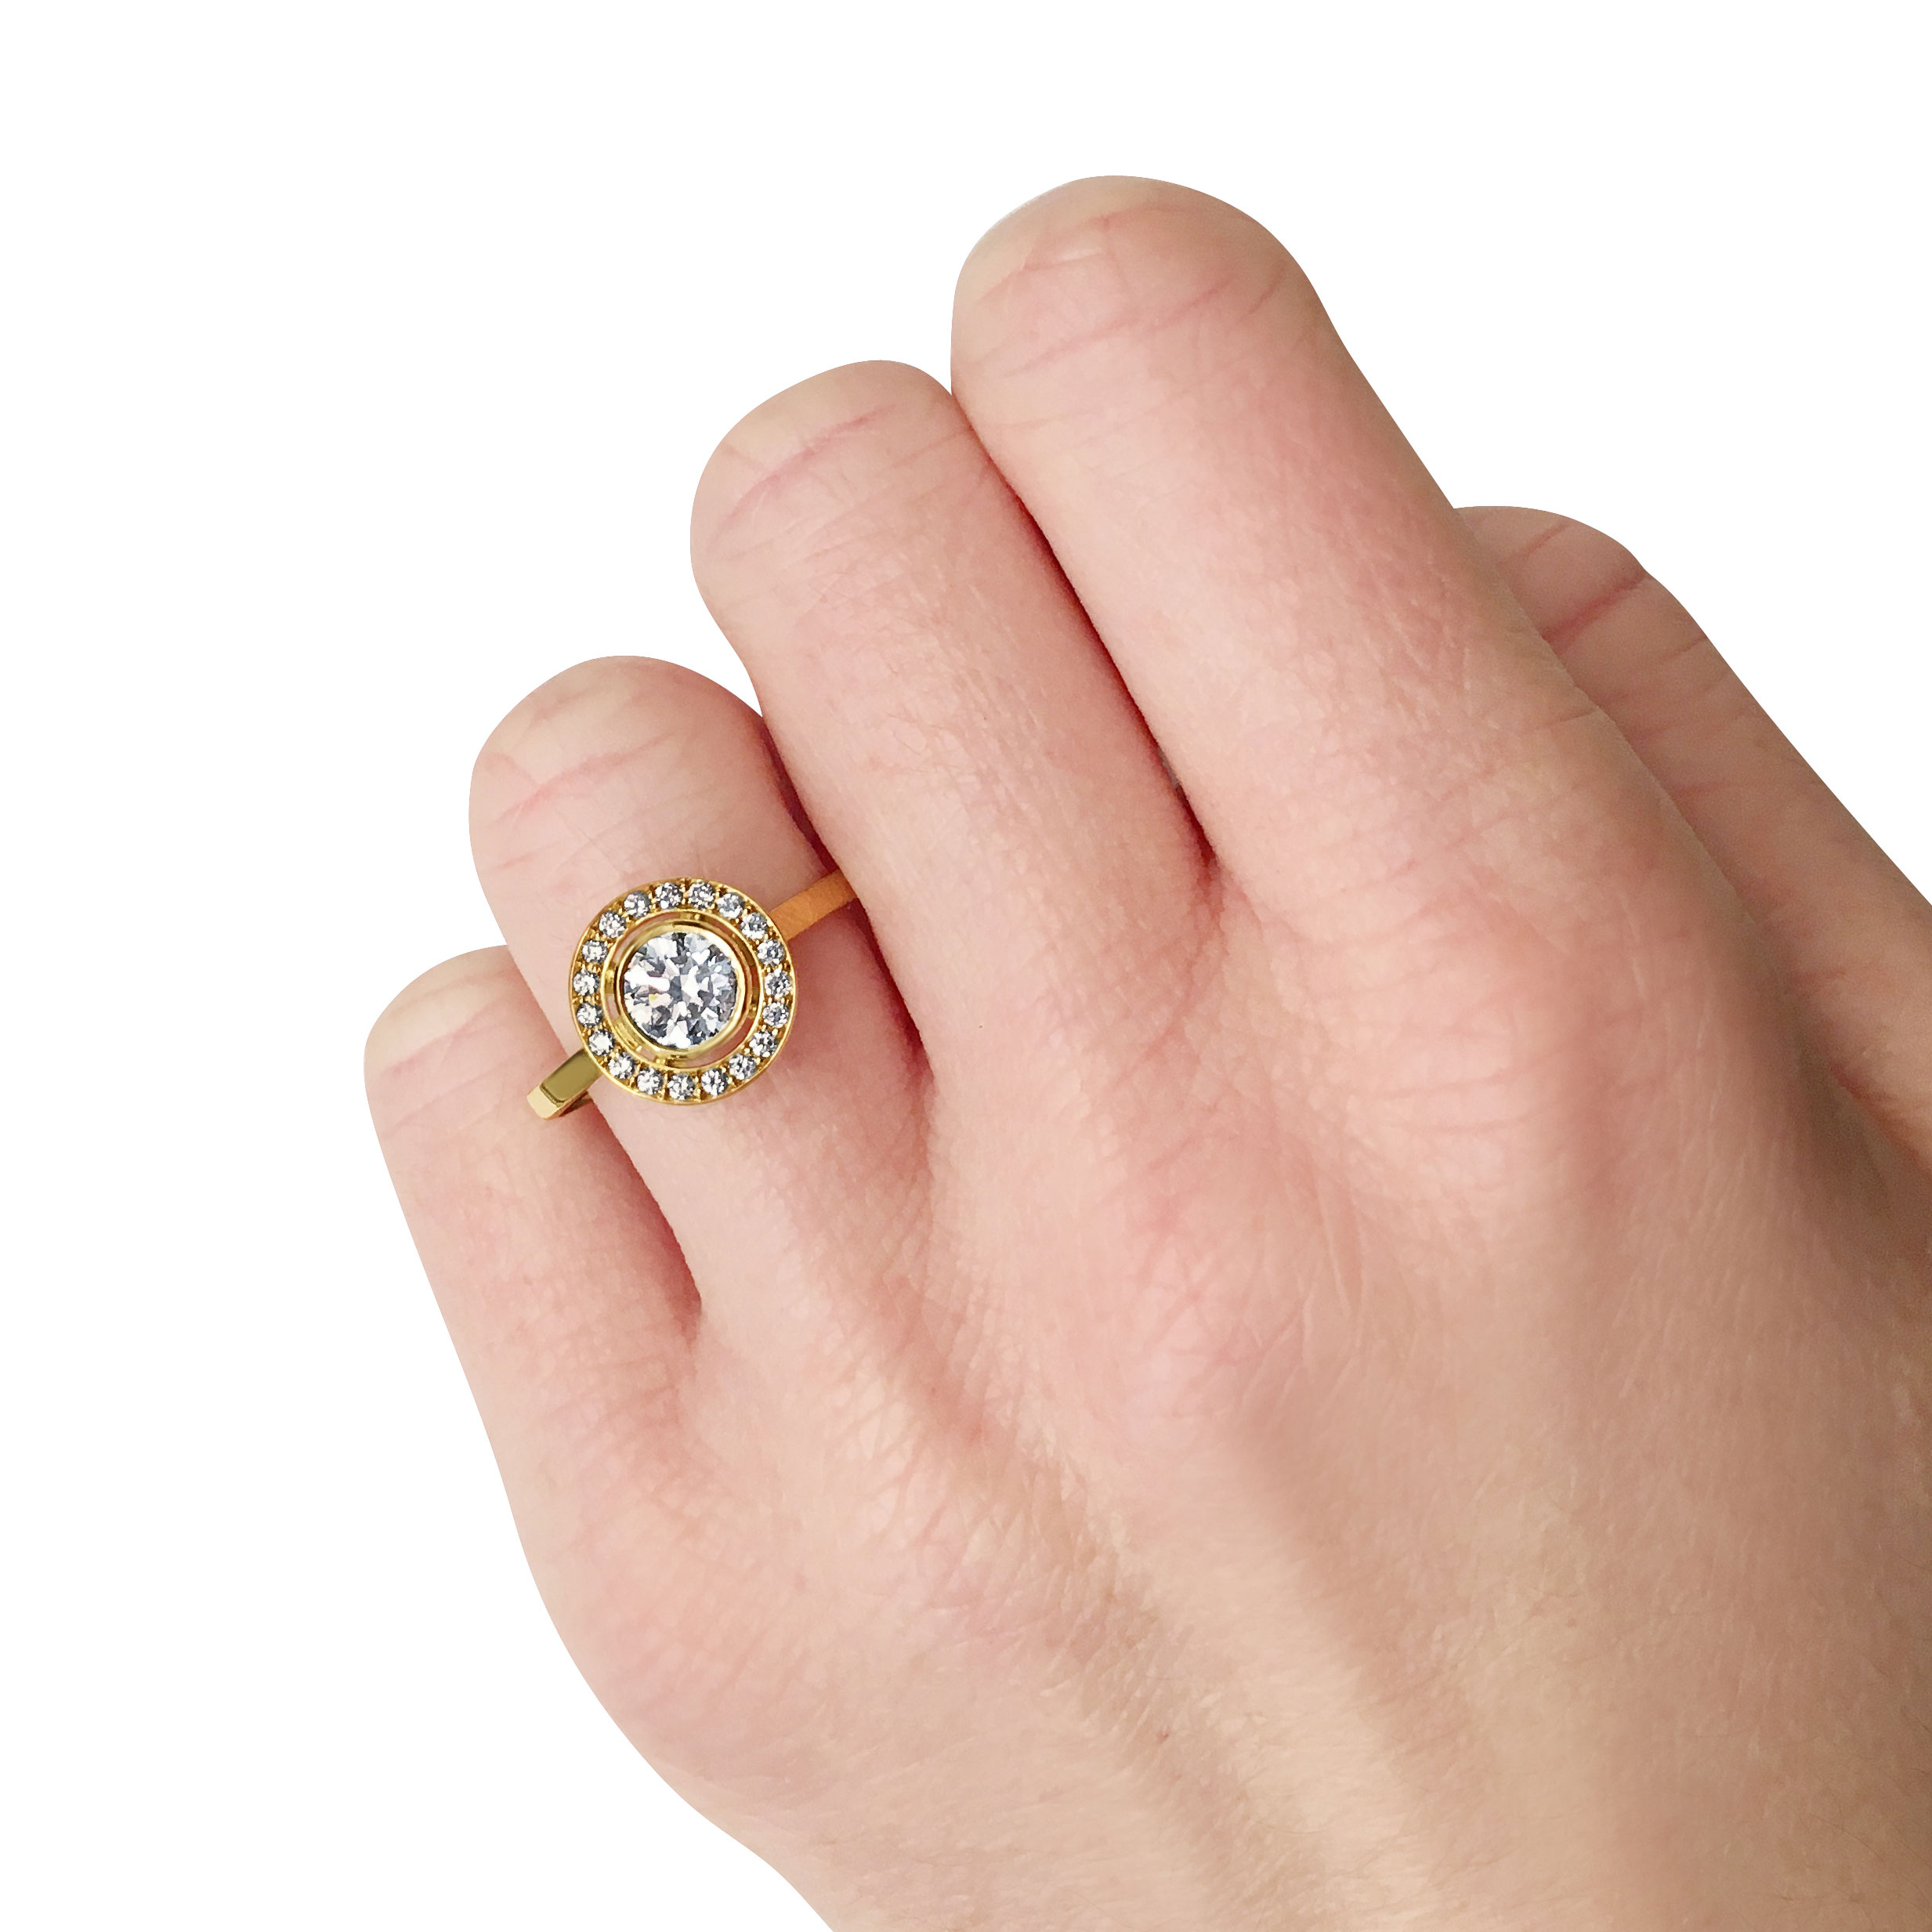 Round-cut diamond with diamond halo engagement ring, mounted in 18ct yellow gold. 